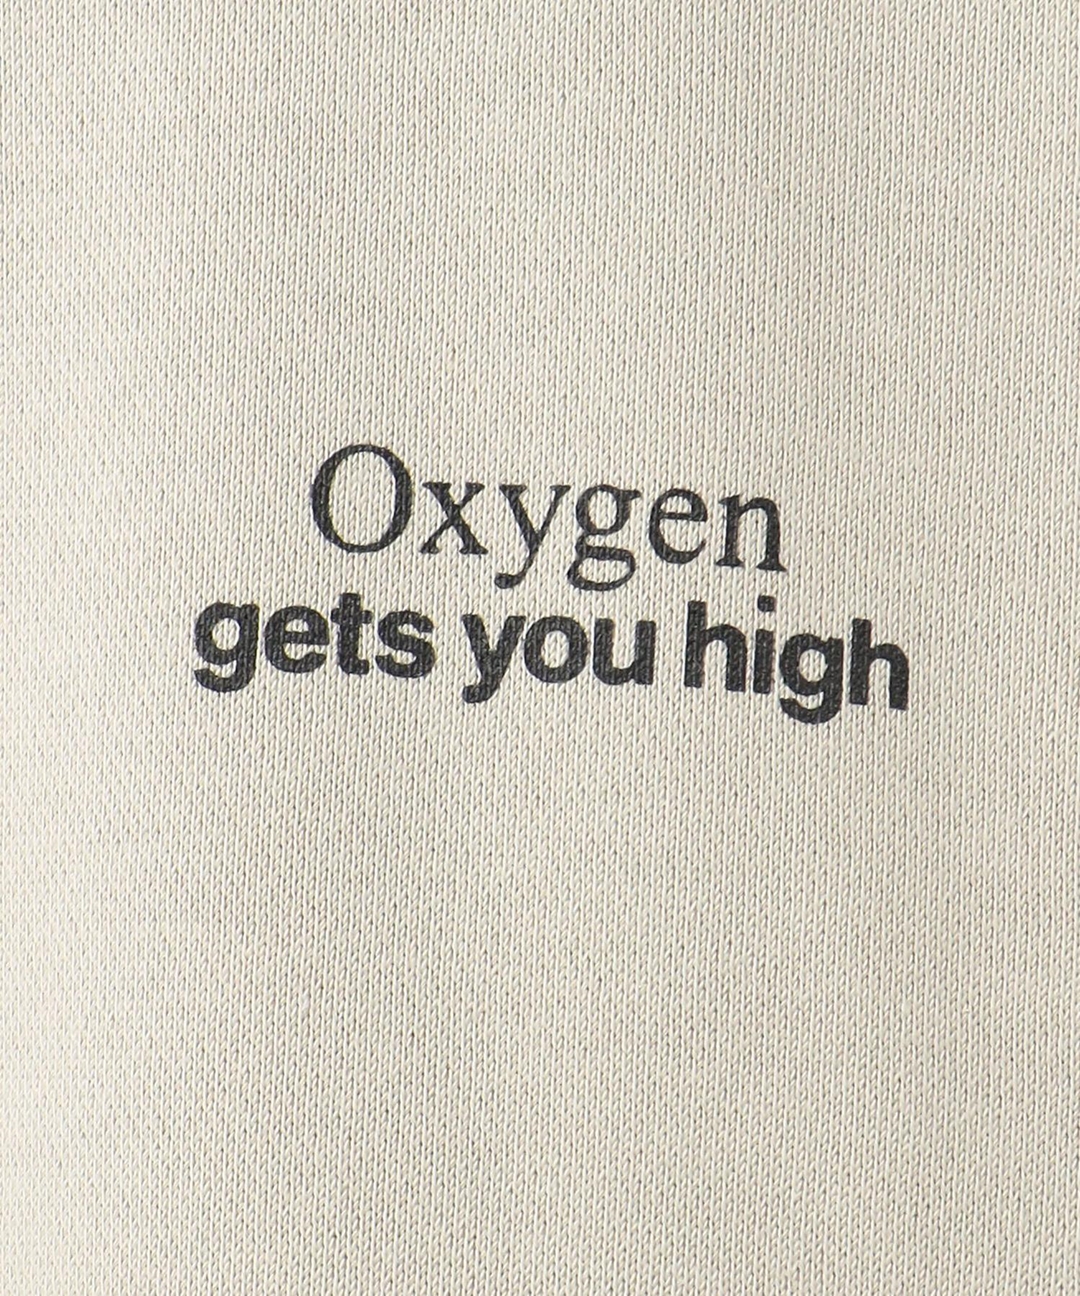 THE HOTEL LOBBY ARCHIVES for UNITED ARROWS & SONS “get you high/スウェット”が2/19 11:00~発売 (ザ ホテルロビーアーカイブズ ユナイテッドアローズ)